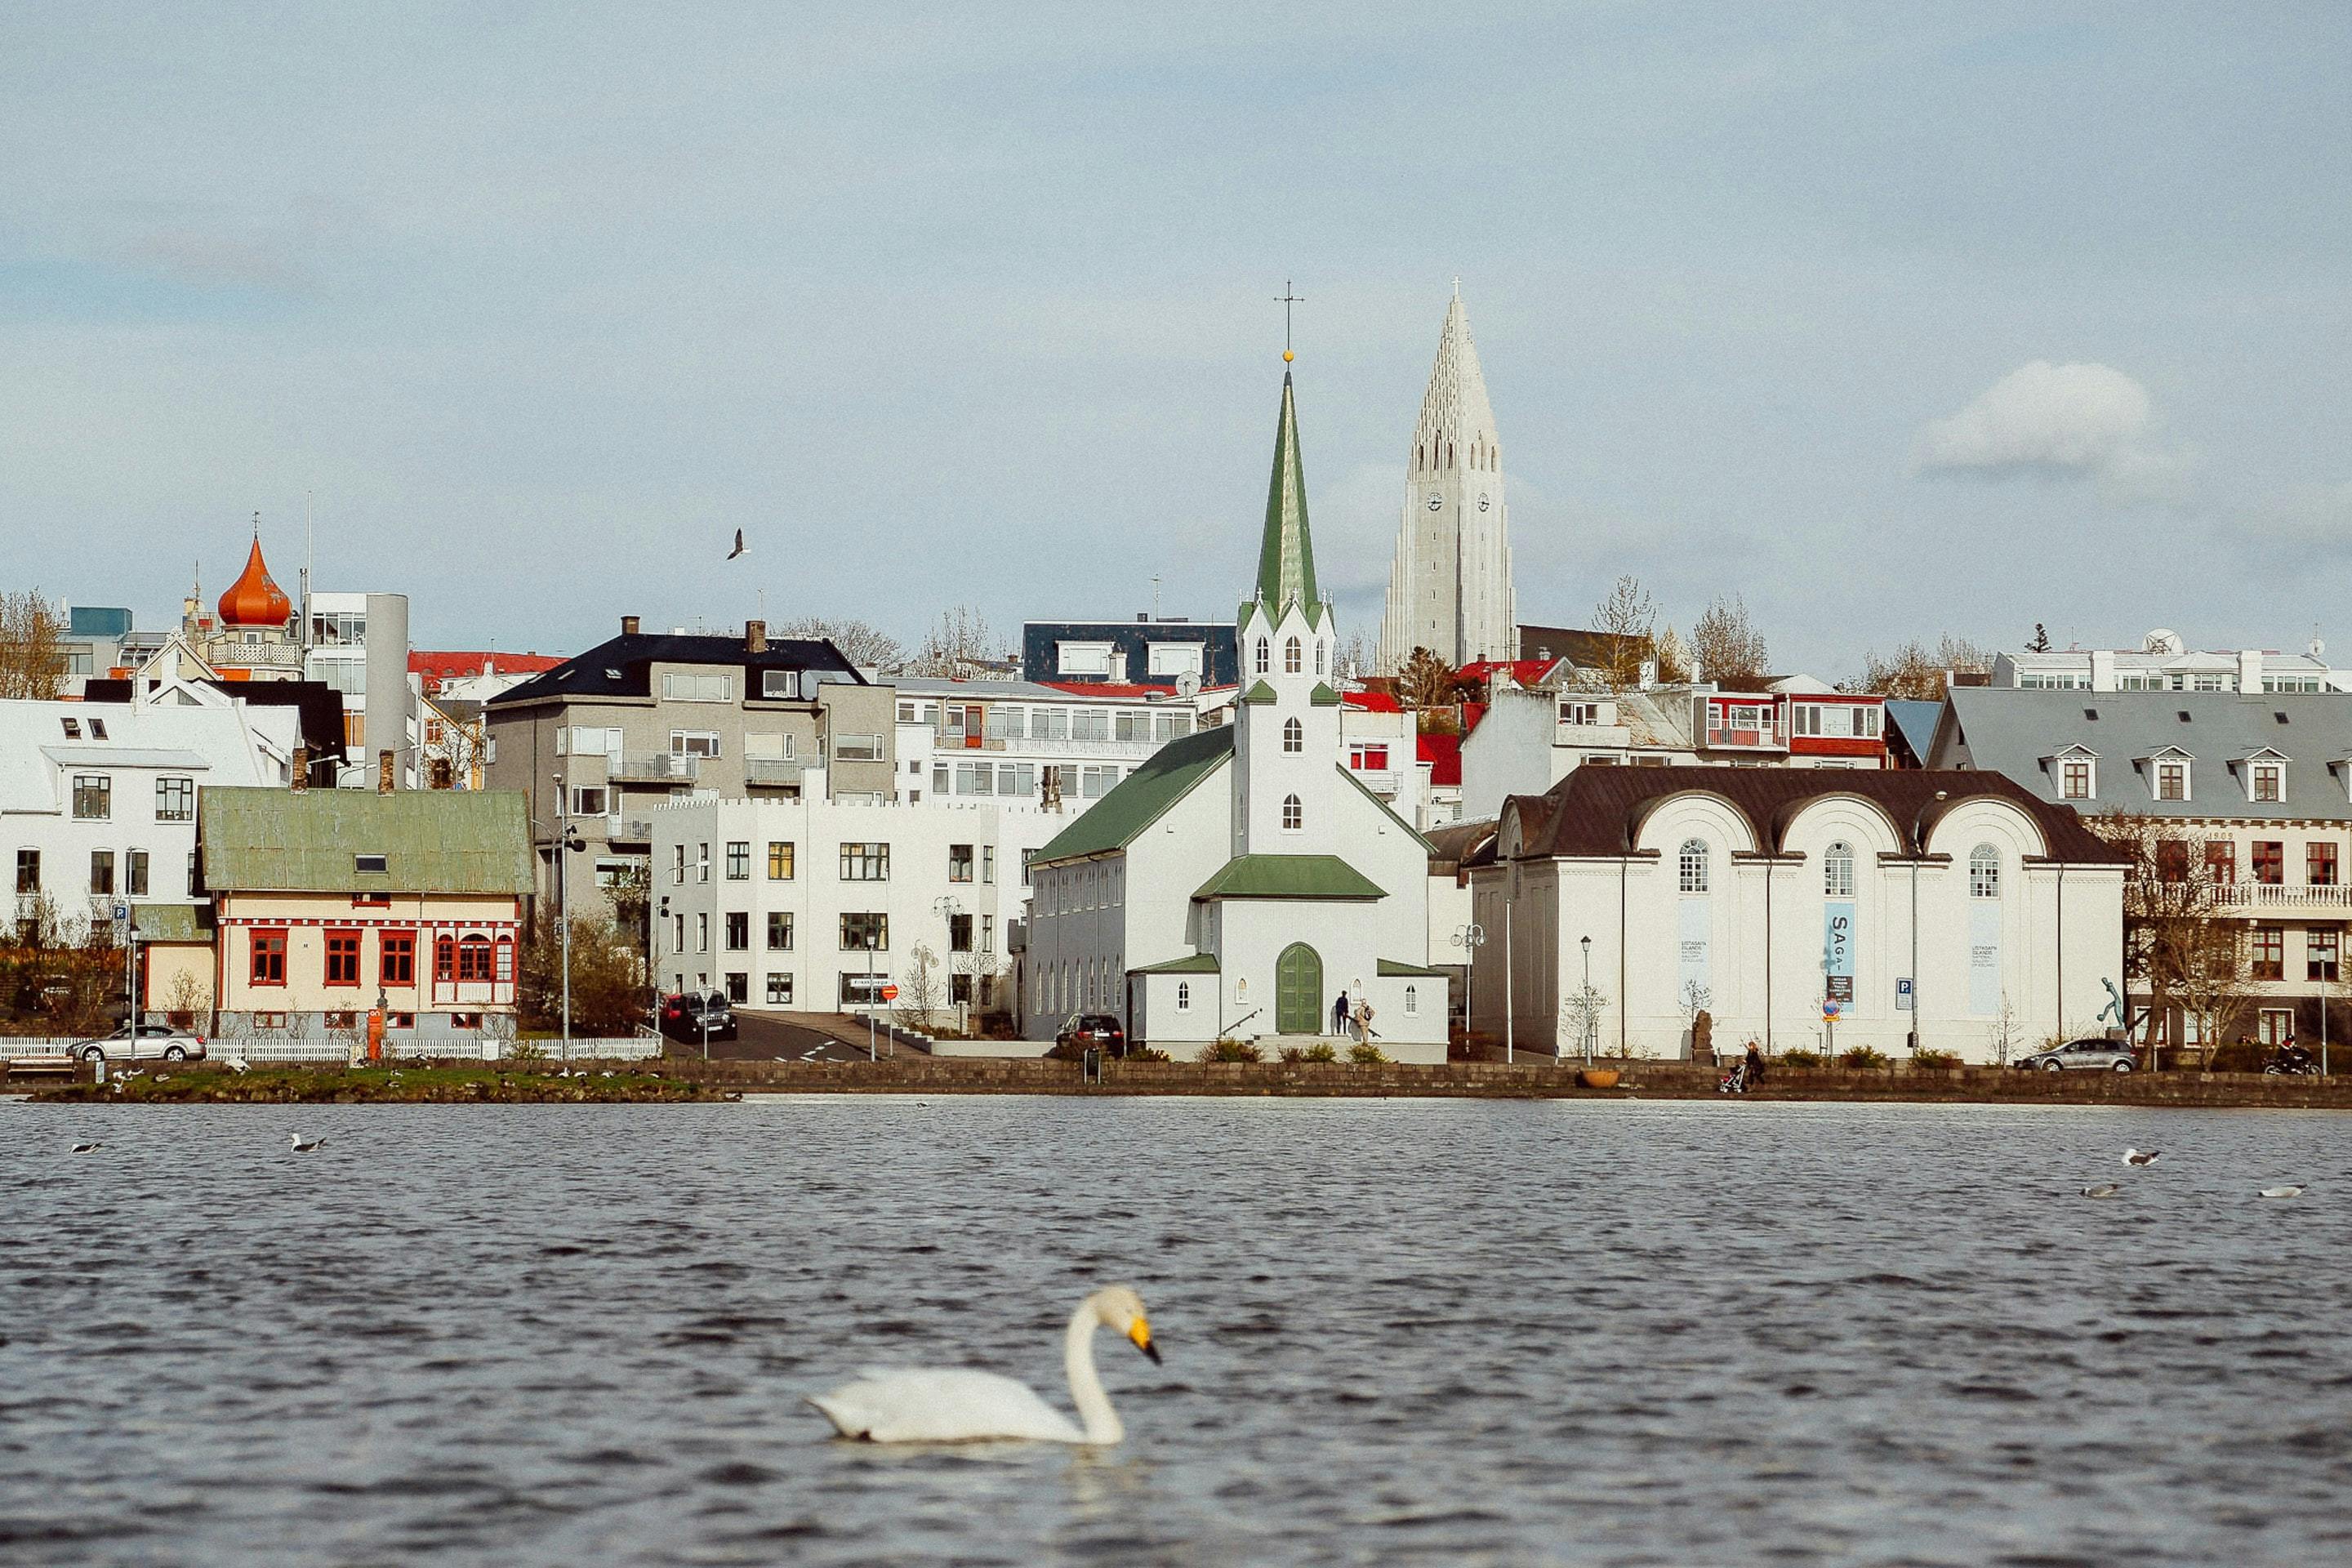 Tour of Reykjavik's instagrammable spots with a local